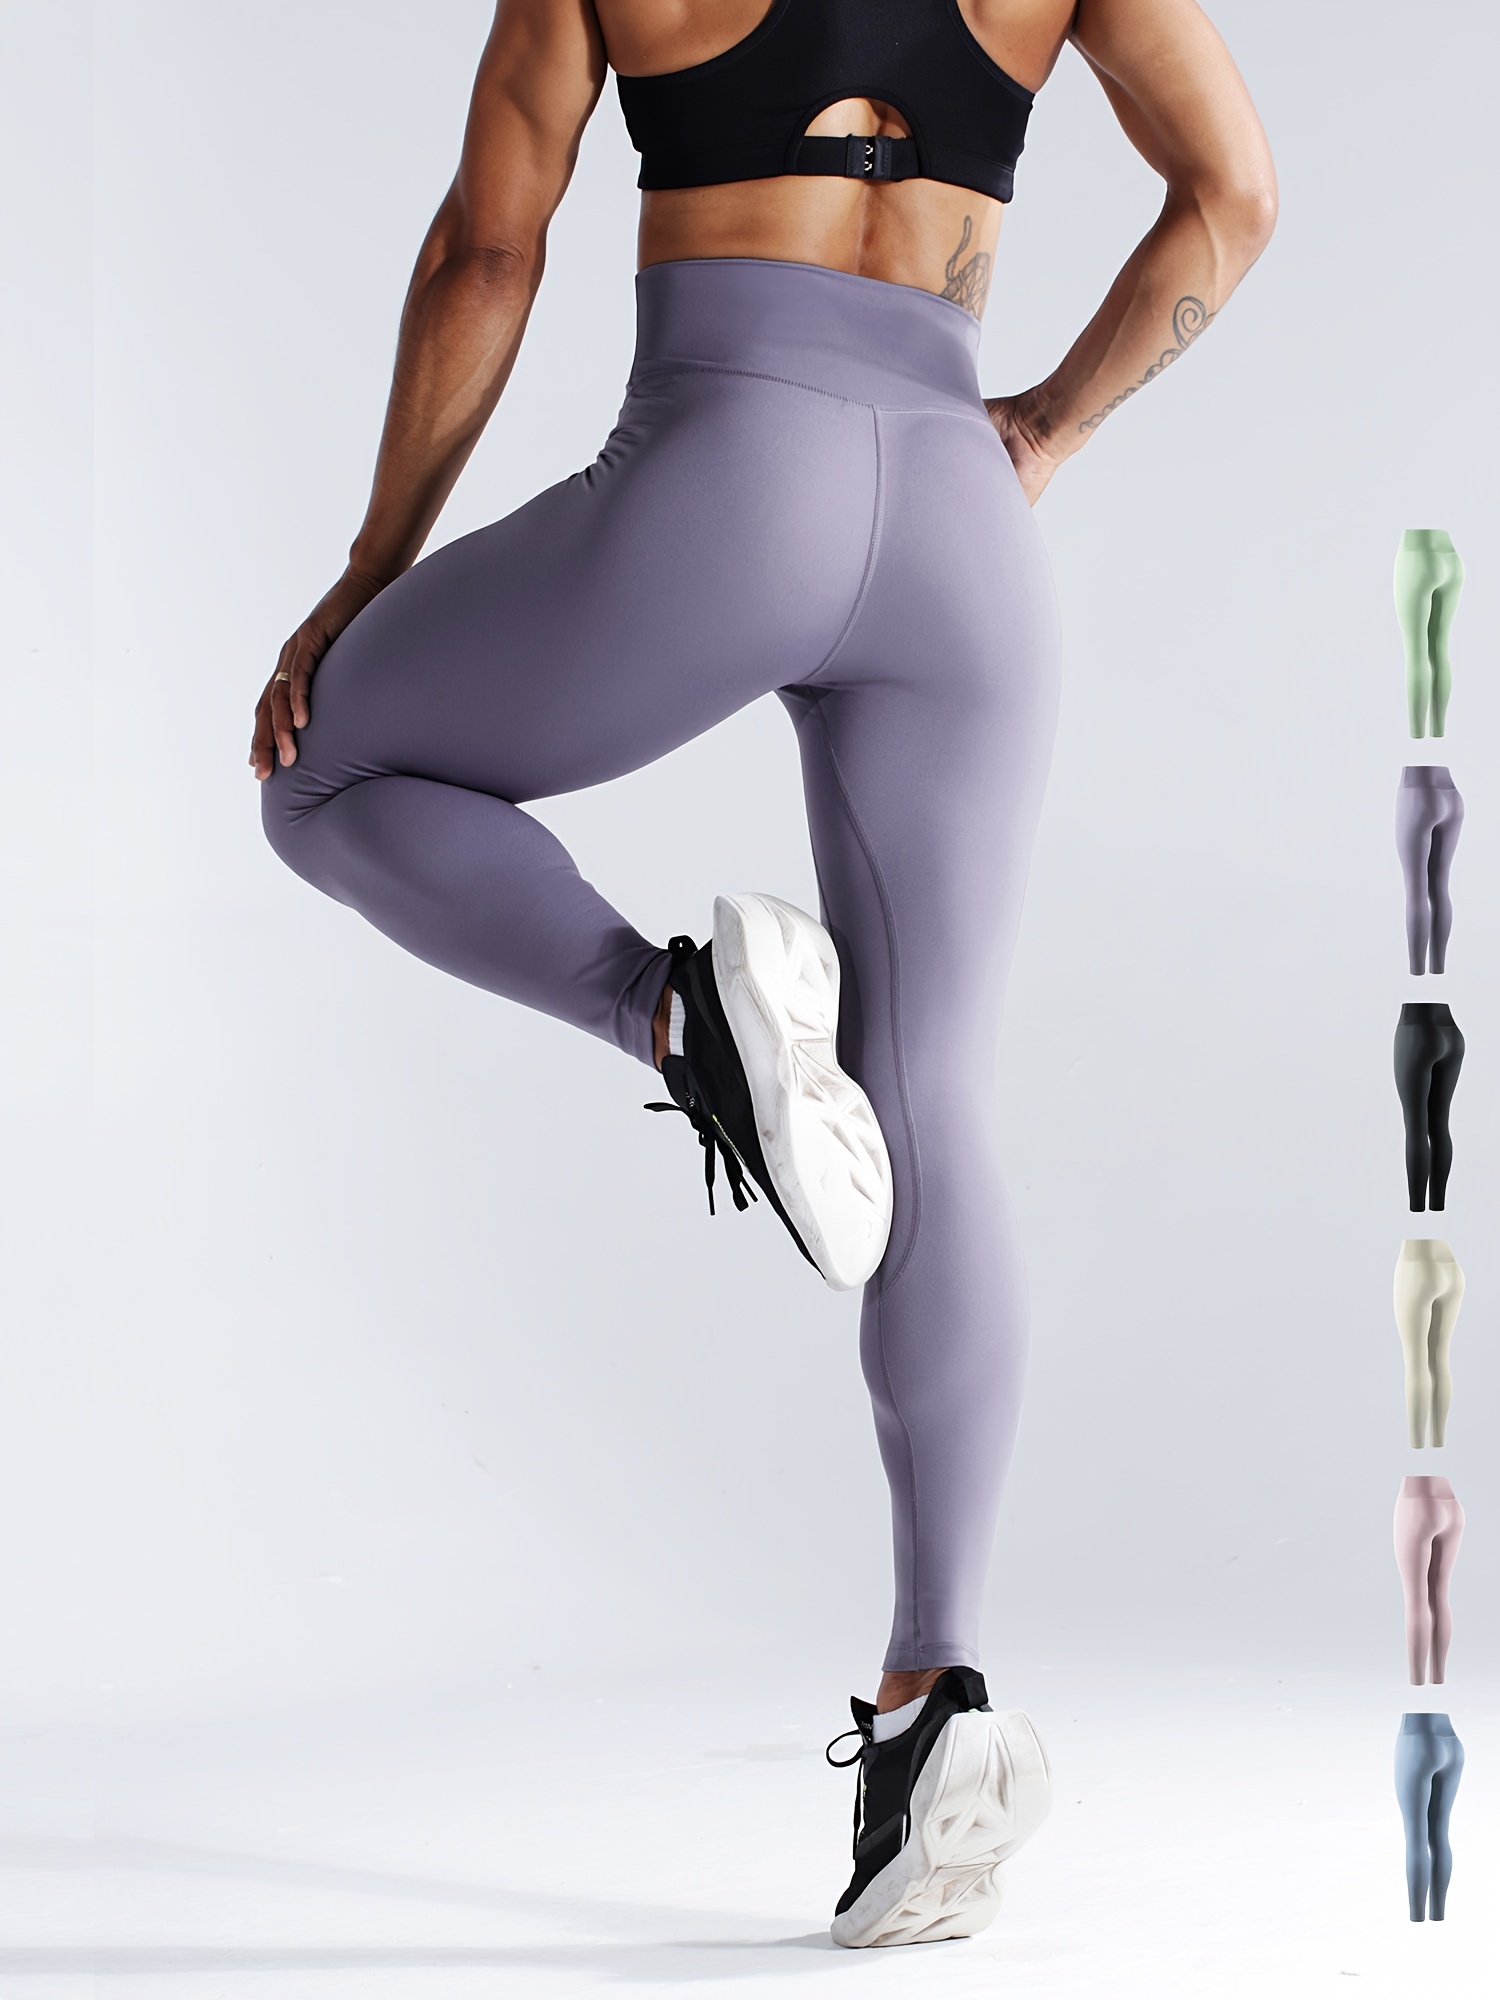 Women's Spring/Summer 2023 Stretch Pants: Thin Buttocks, Foot Pants,  9-Point Stretch, Versatile for Workout, Outfit & Everyday Wear